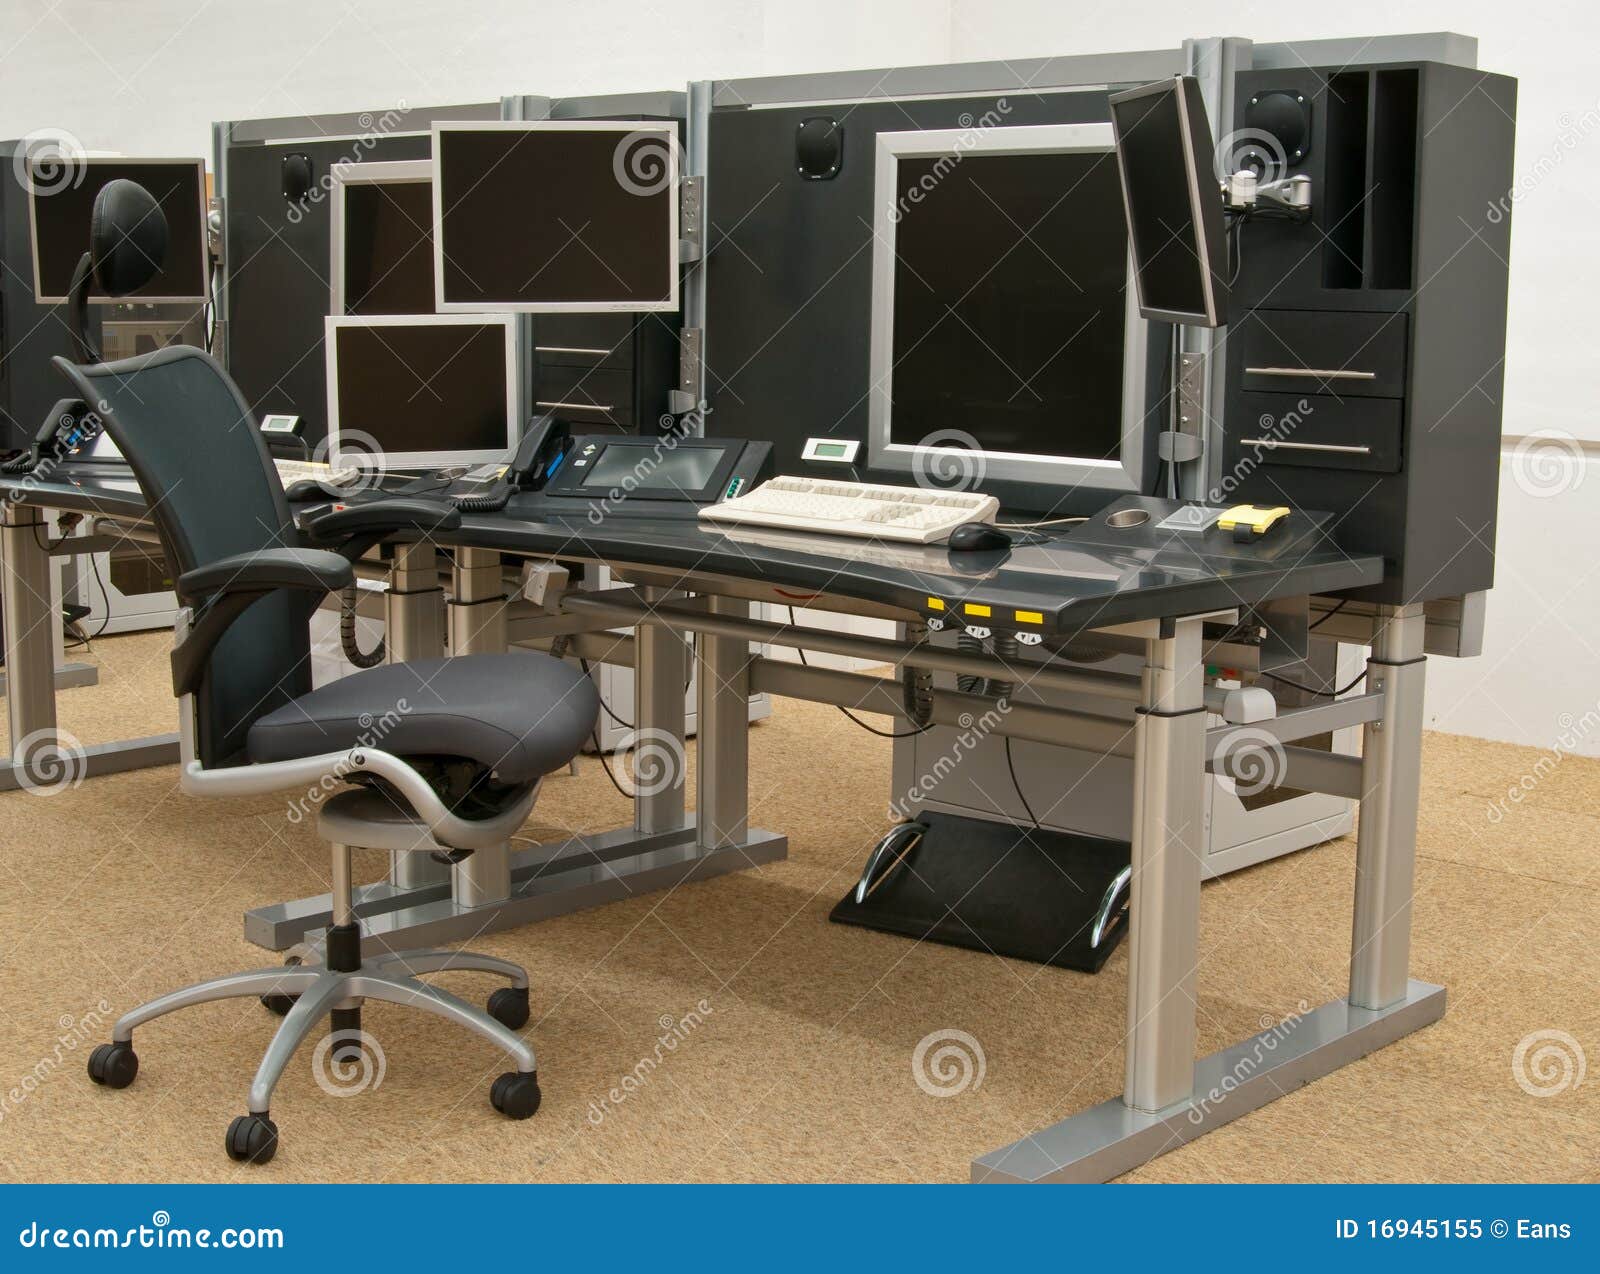 Set of monitors stock image. Image of industrial, table - 16945155